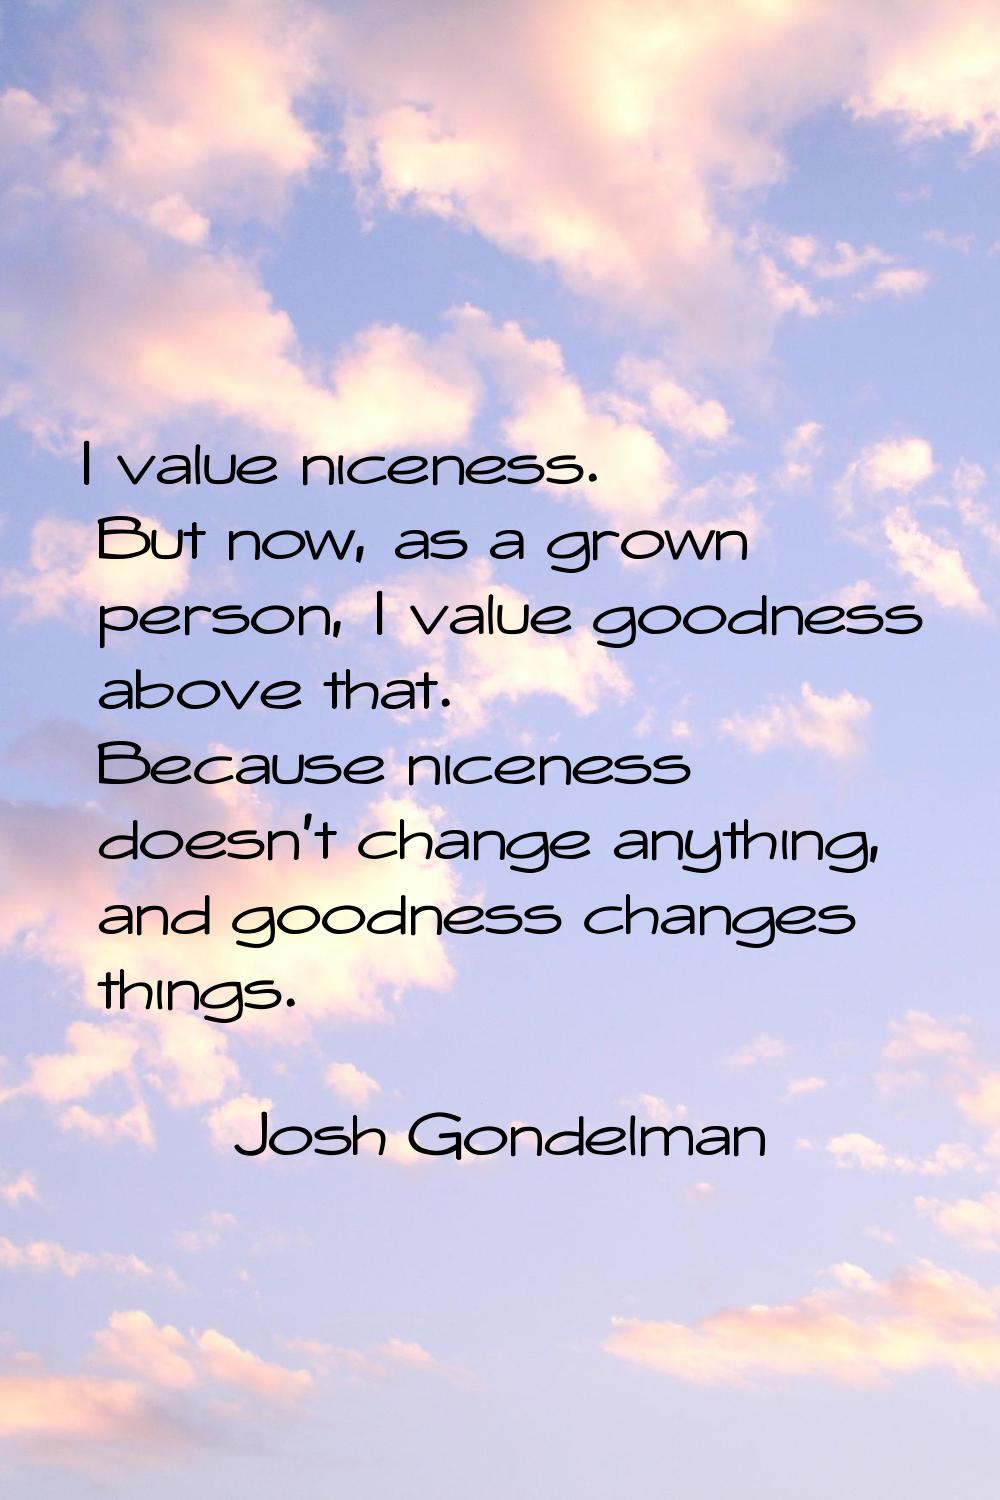 I value niceness. But now, as a grown person, I value goodness above that. Because niceness doesn't